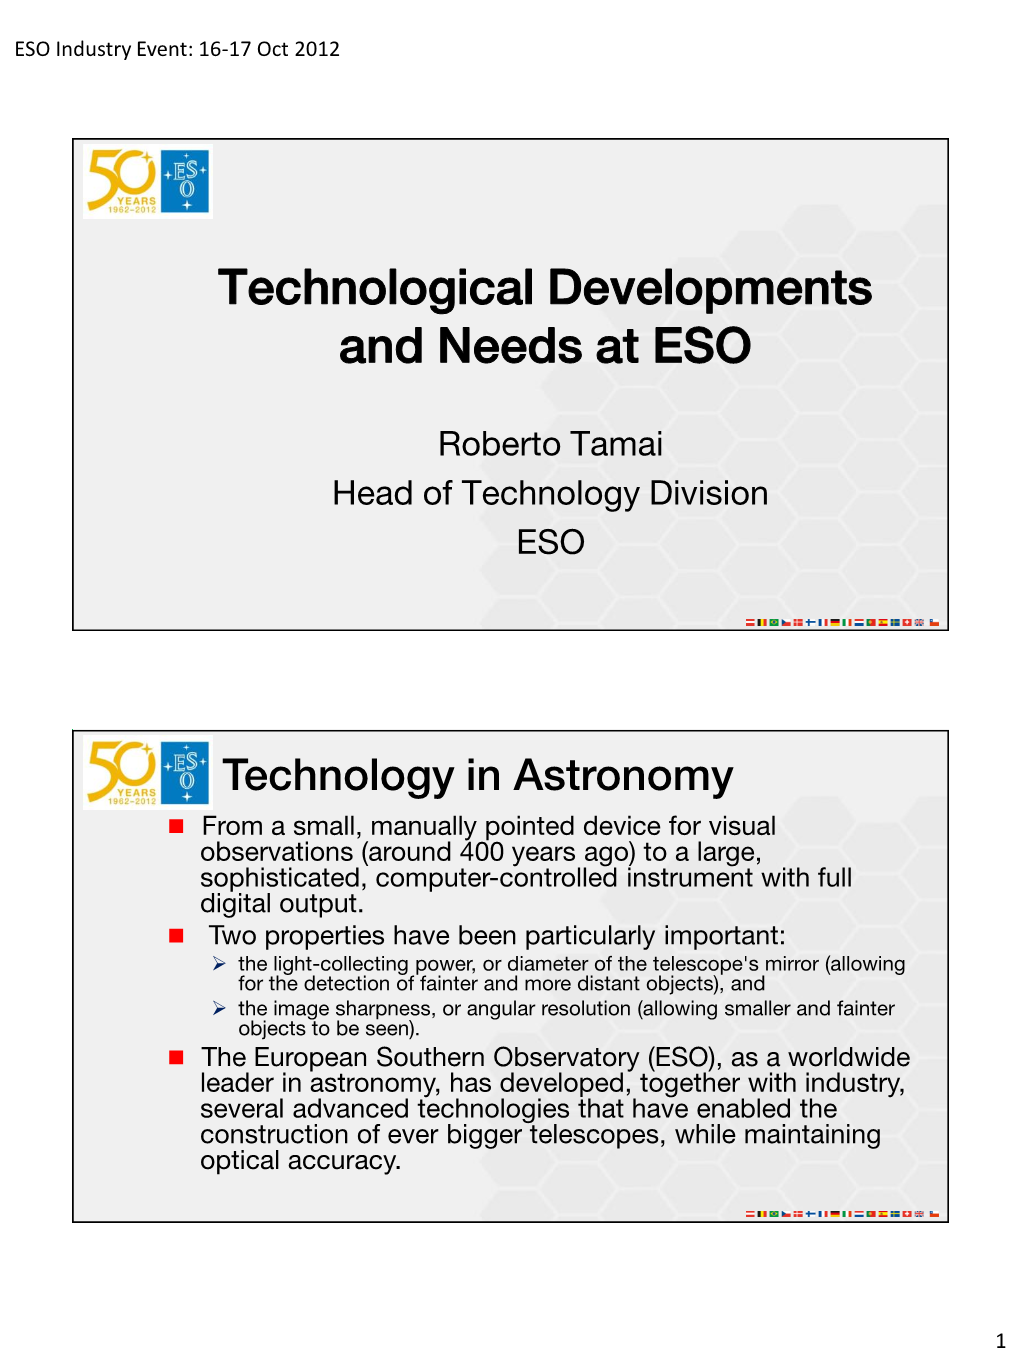 Technological Developments and Needs at ESO